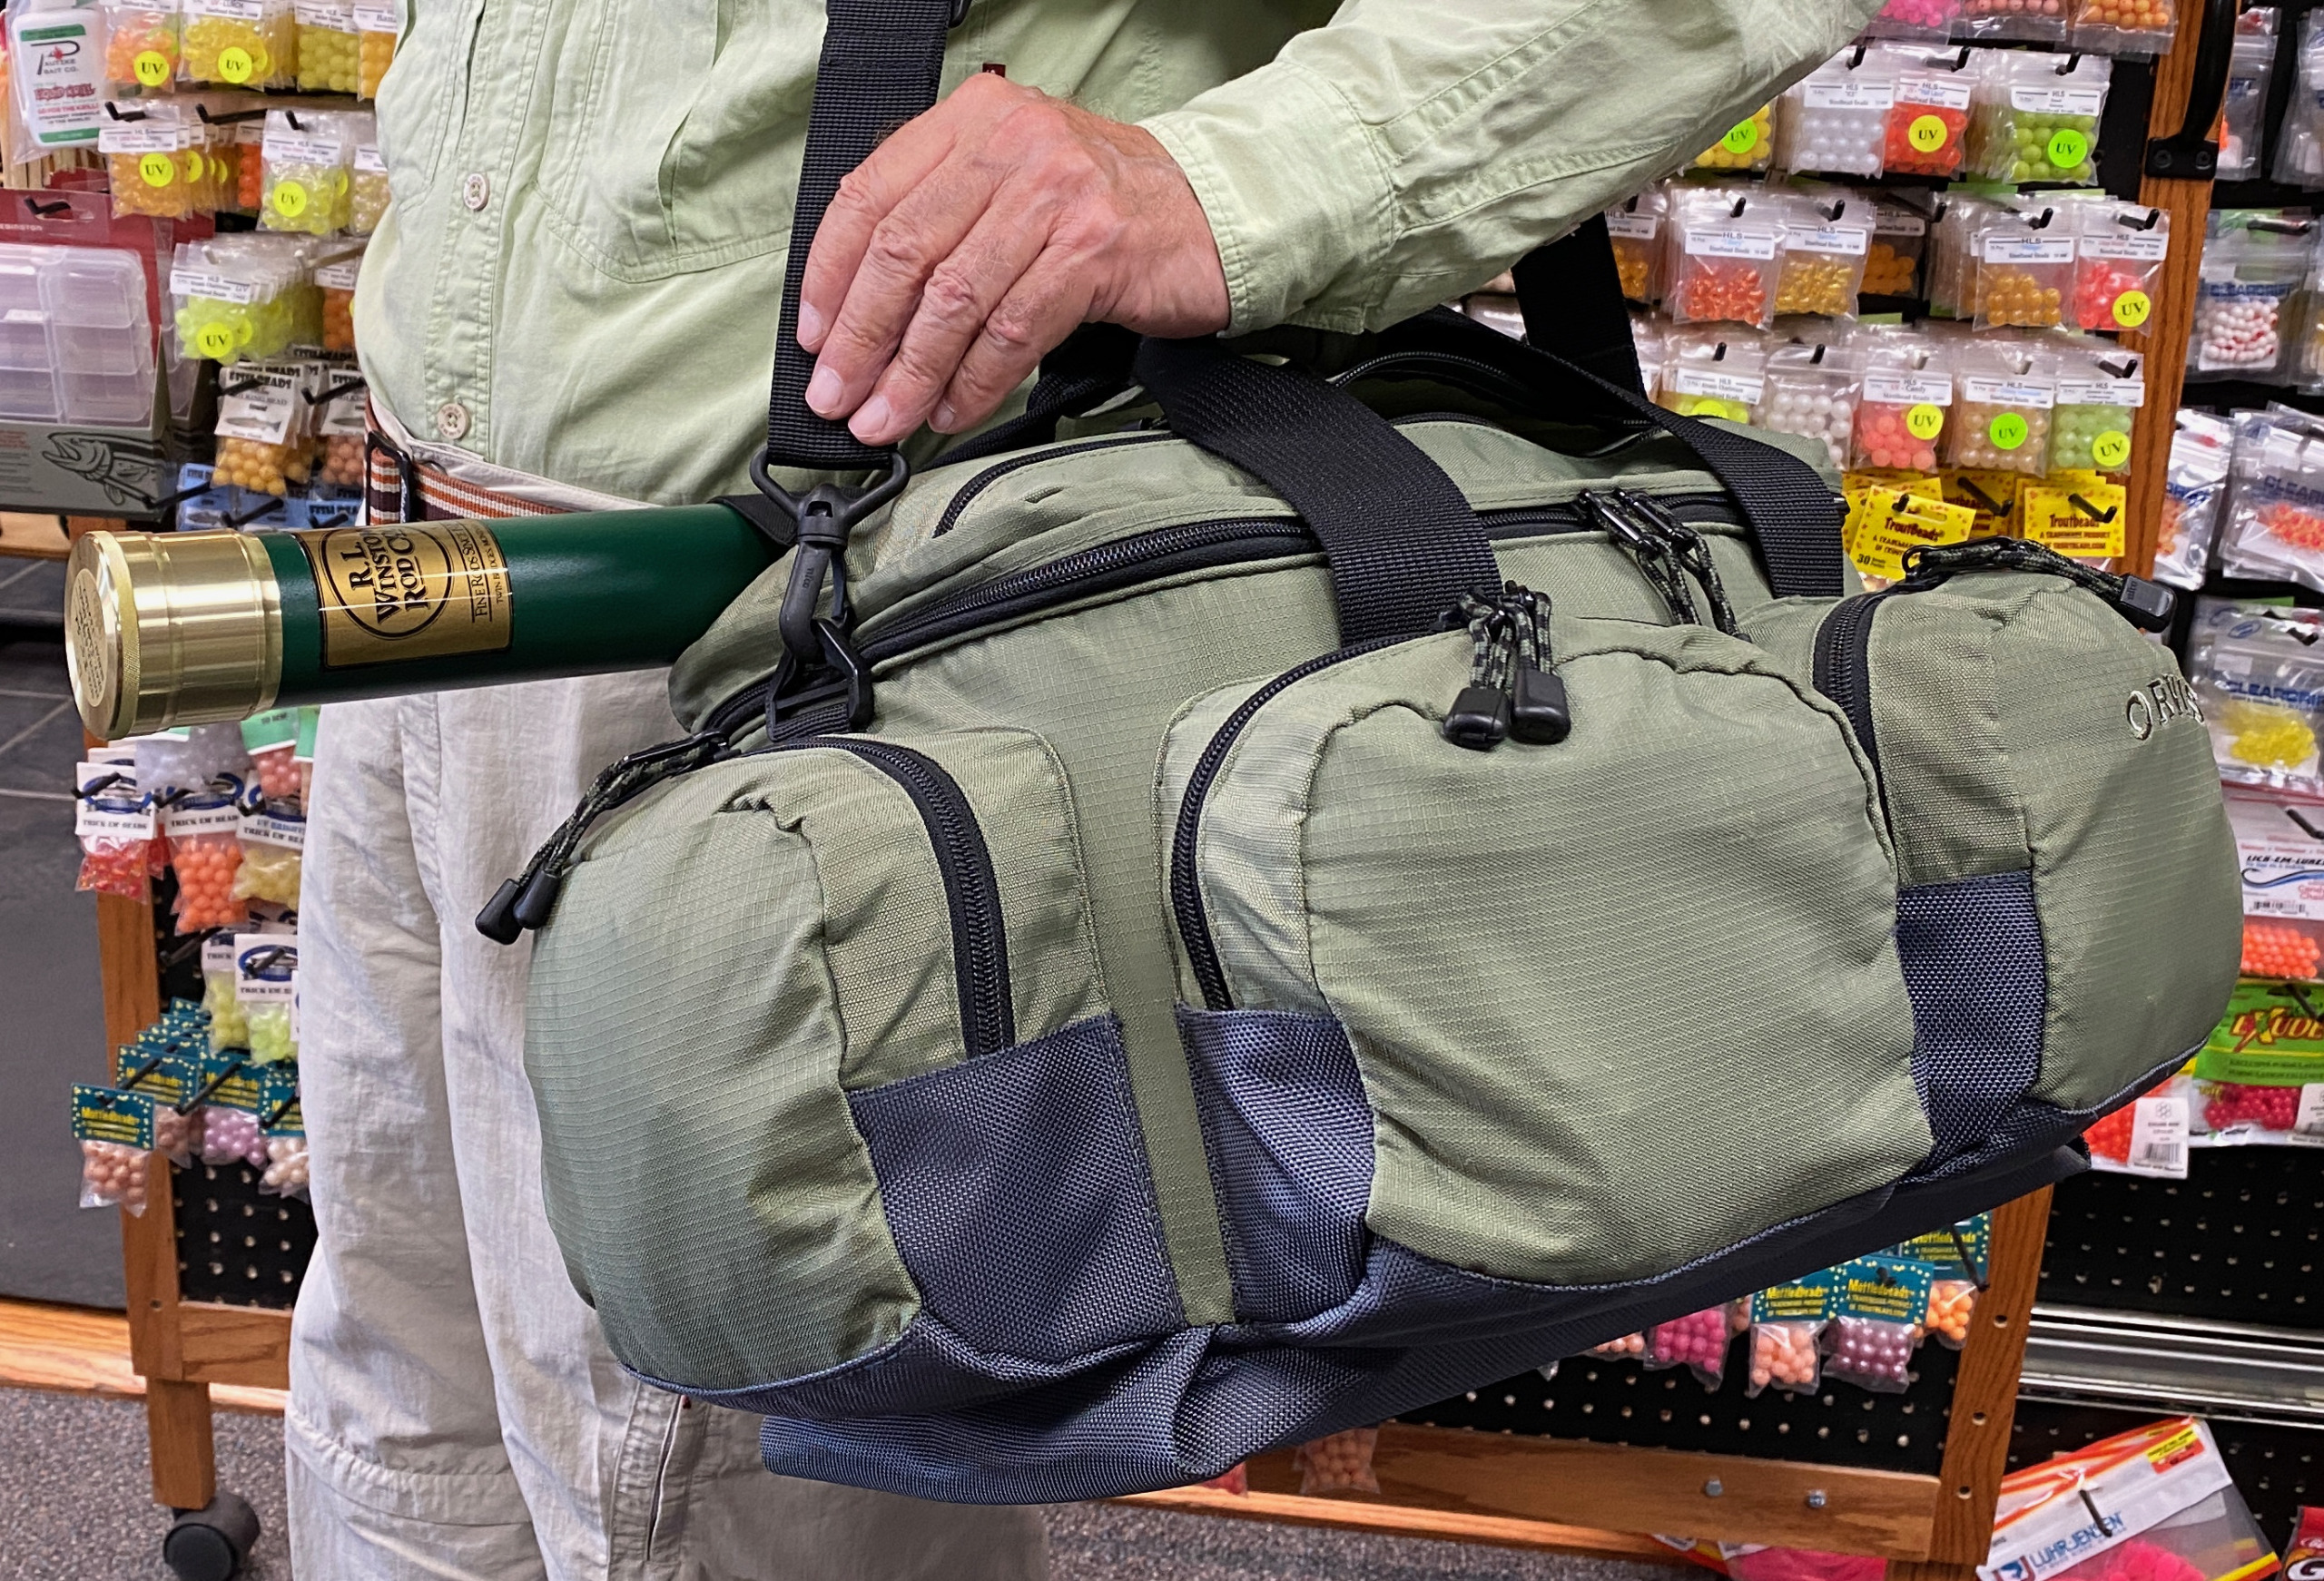 https://thefirstcast.ca/wp-content/uploads/2022/07/Orvis-Gear-Bag-cw-Built-In-Waterproof-Cover-A-scaled.jpeg